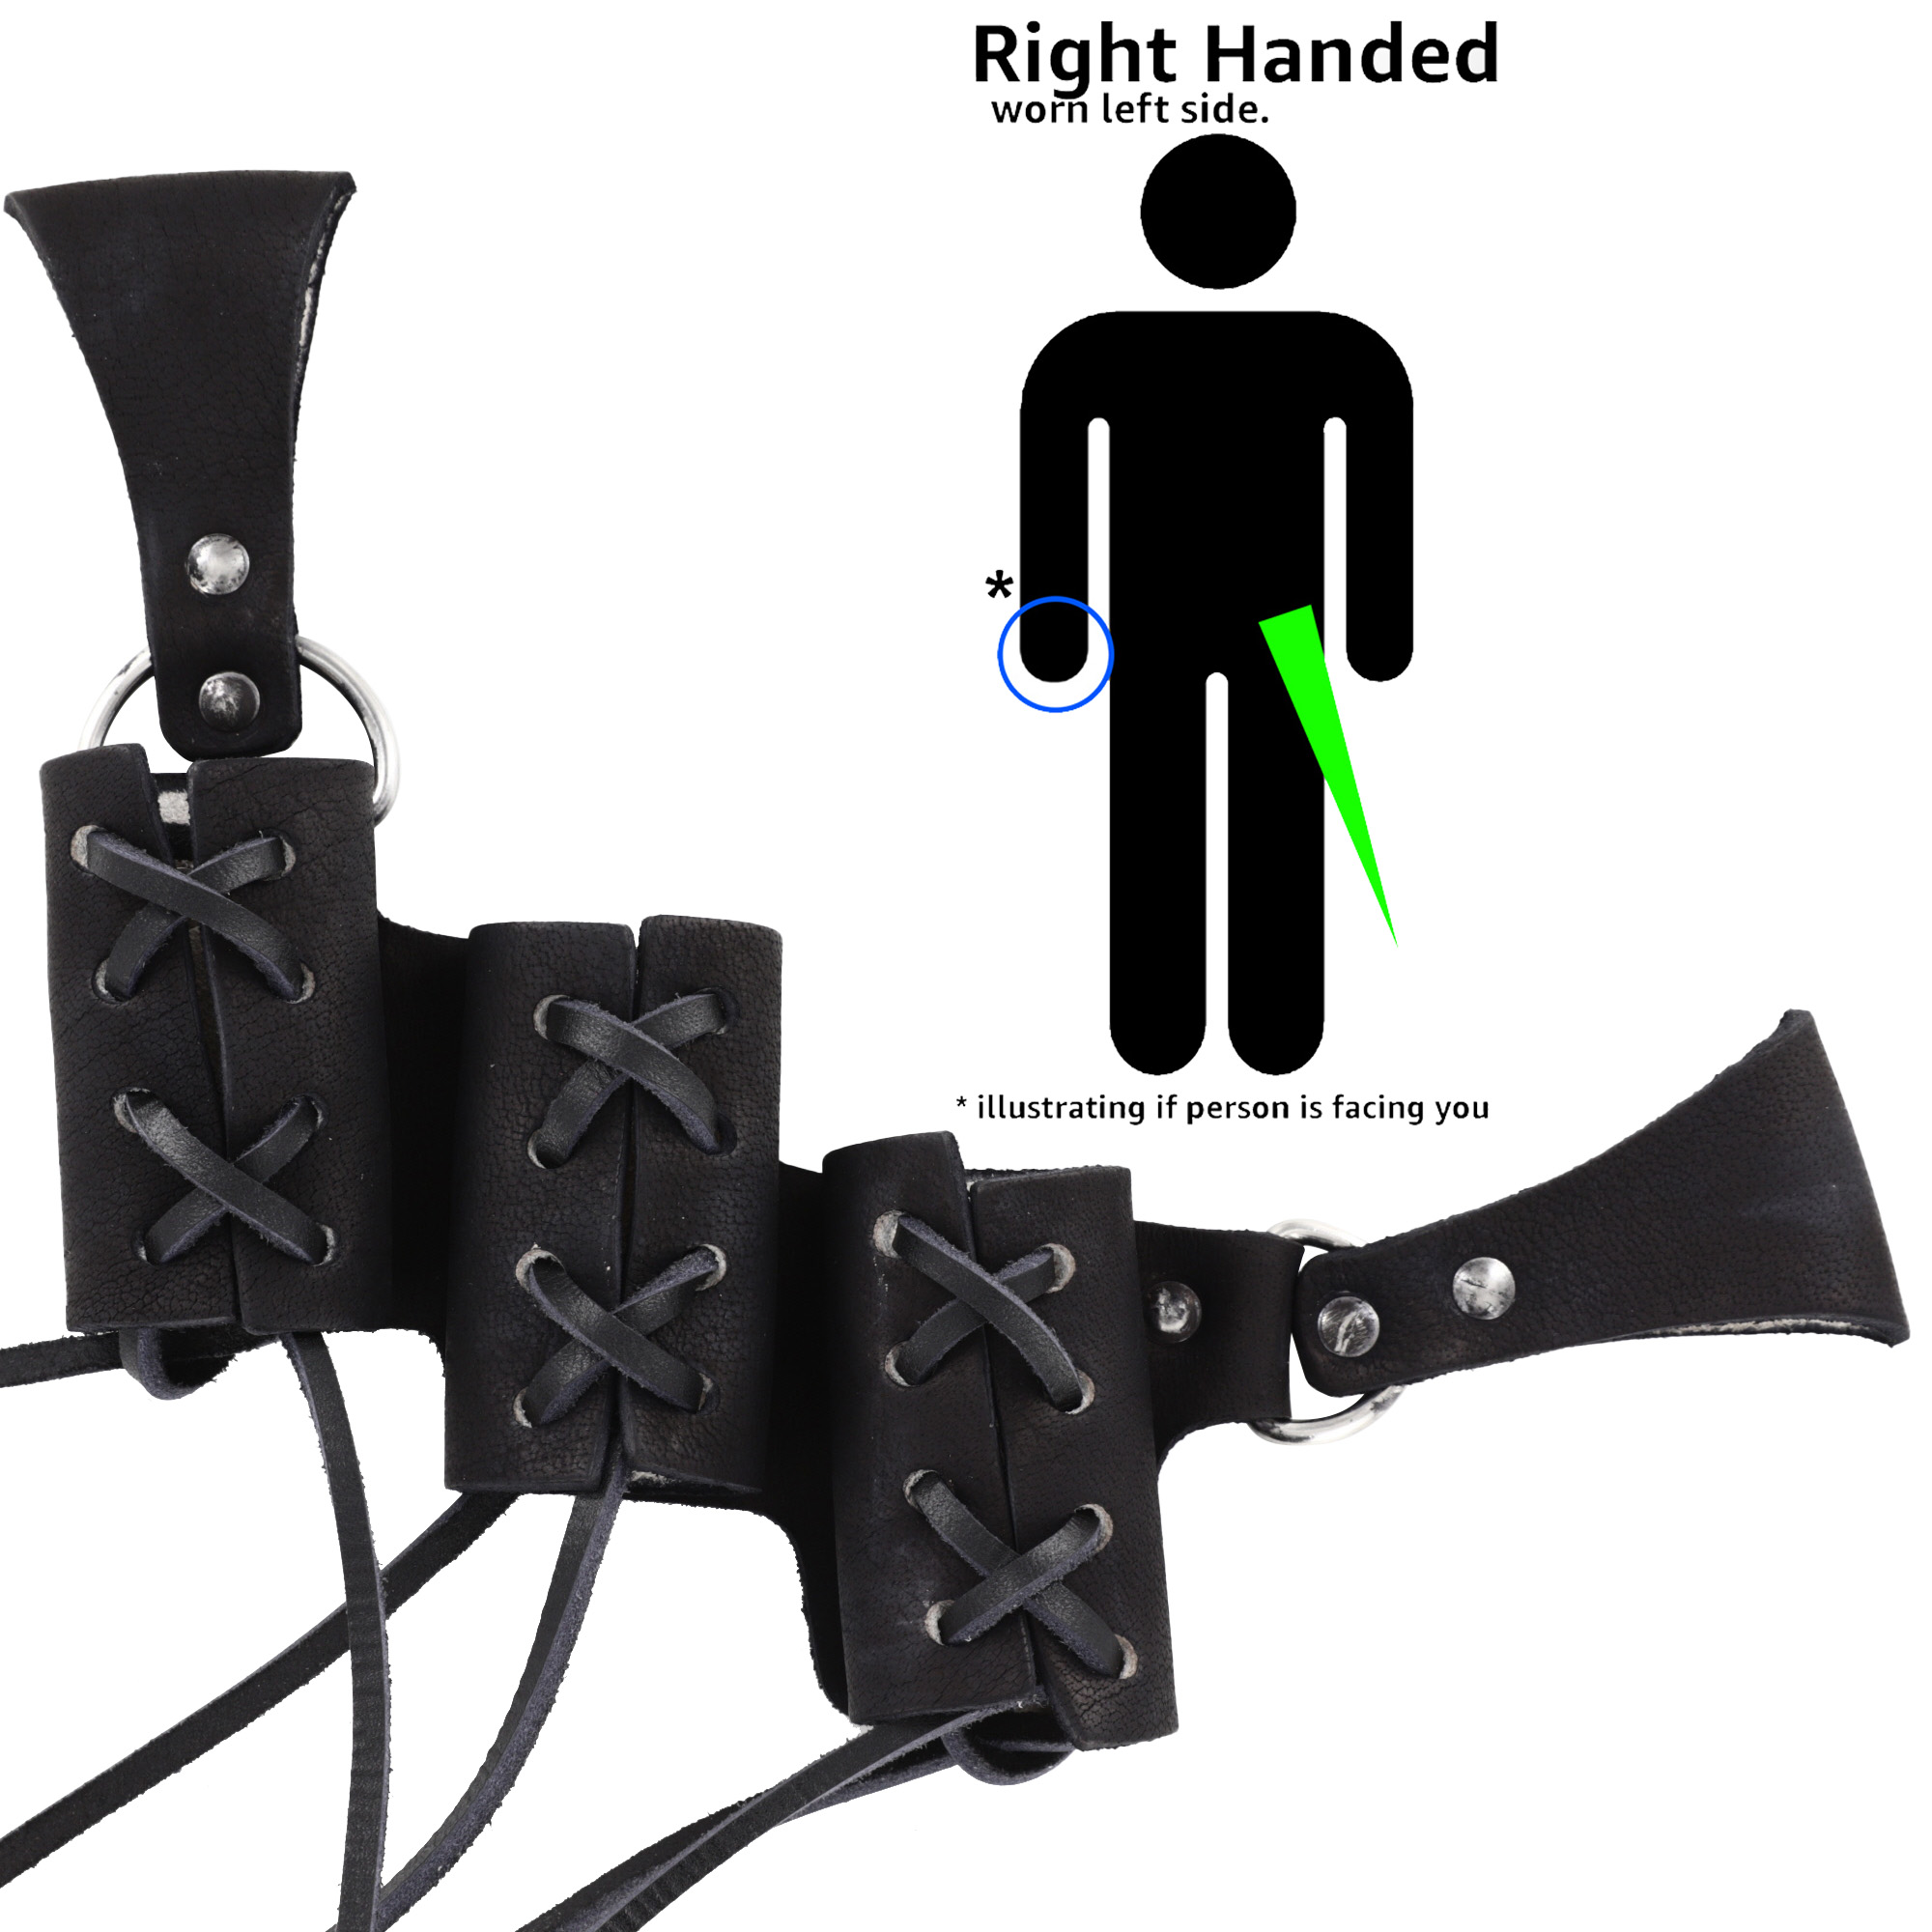 Tertiary Illusion 3 Sword DAGGER Right-Handed Color Choice Medieval Belt Frog w/ Black Lacing